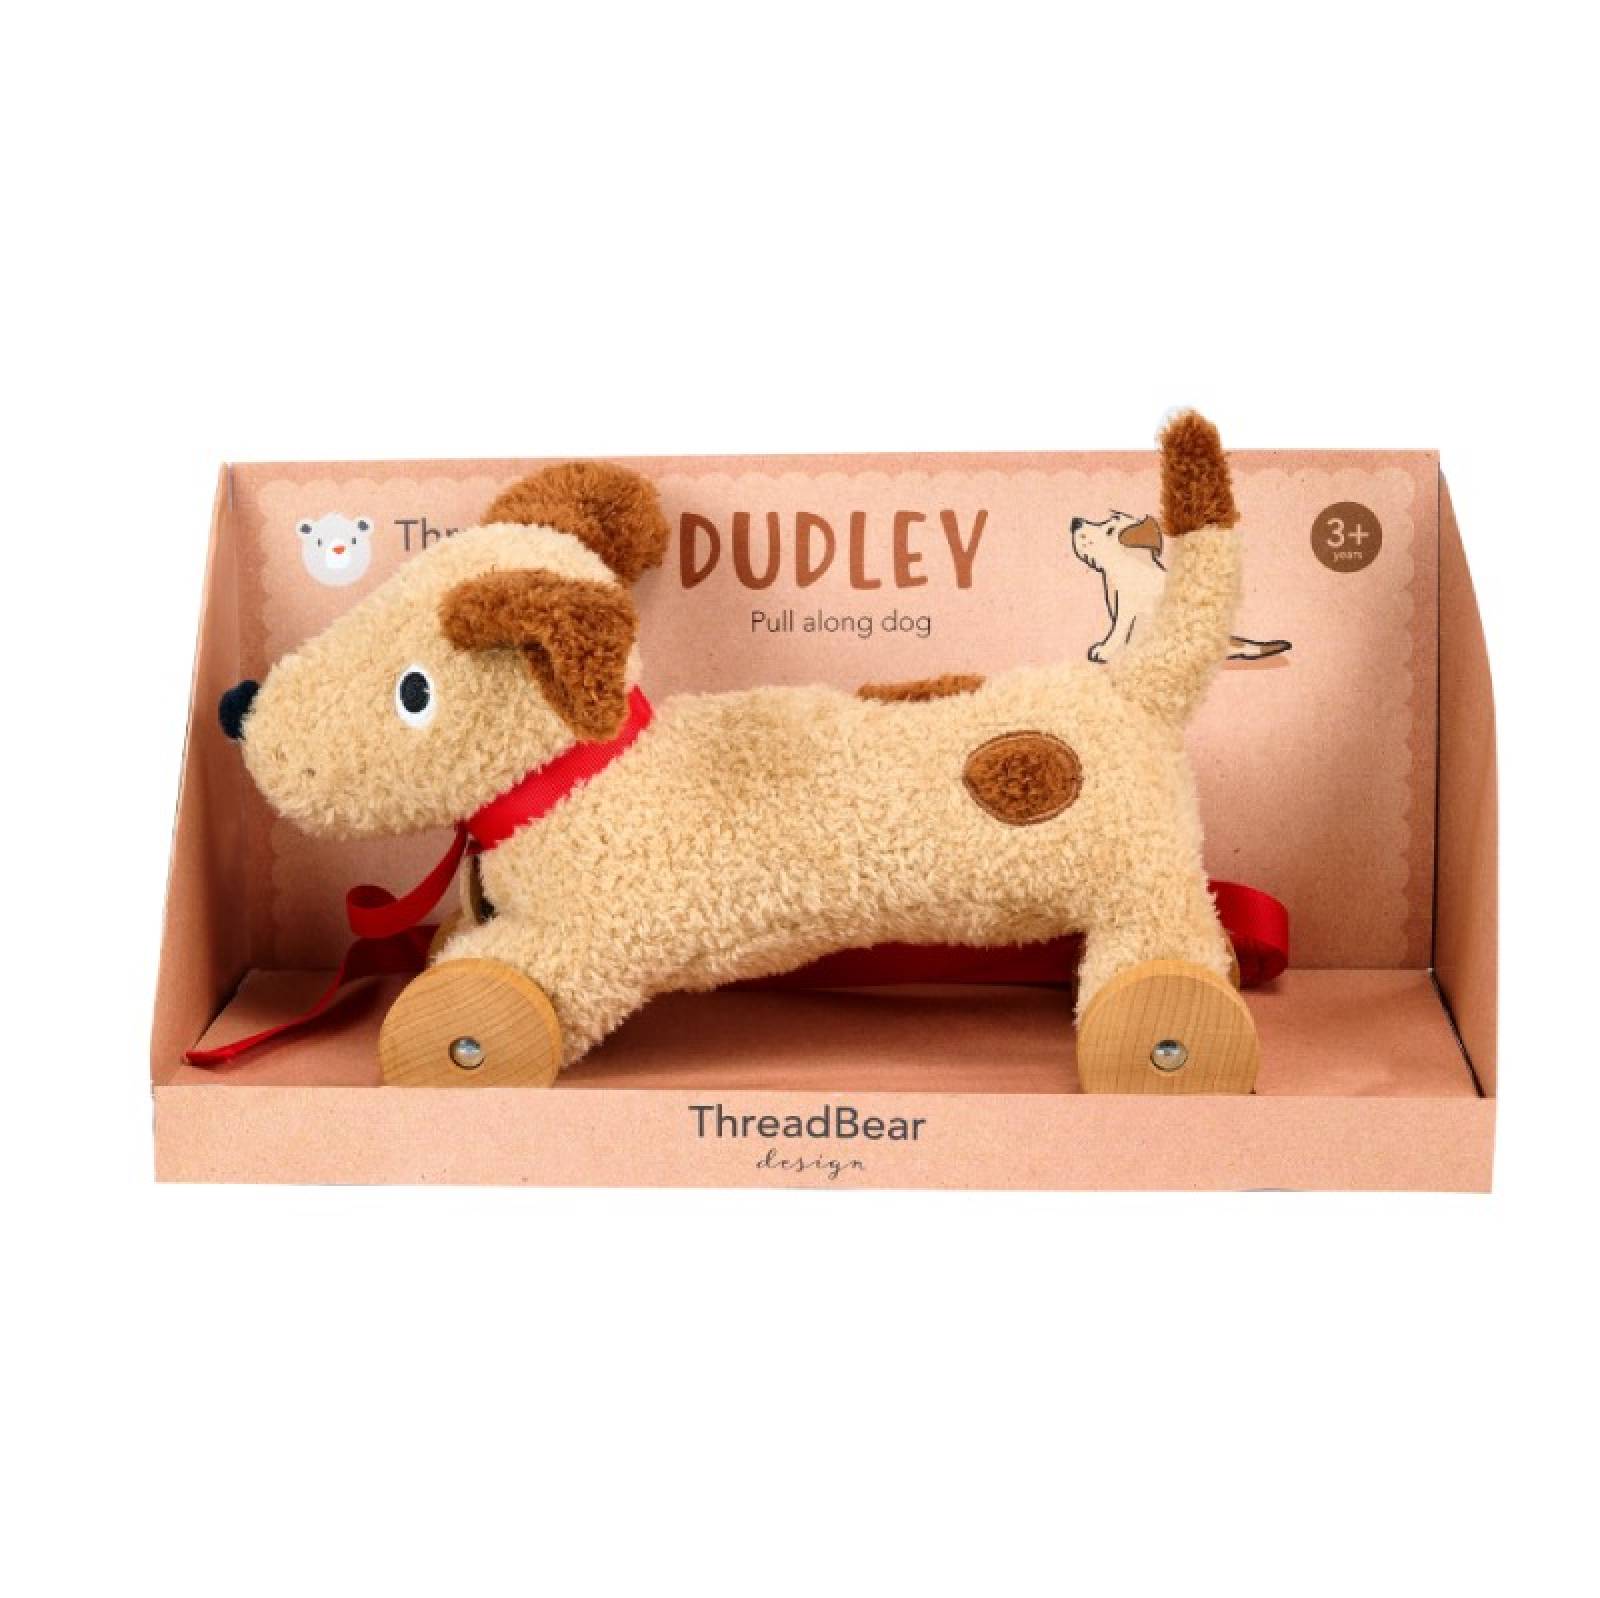 Dudley Pull Along Dog Toy 3+ thumbnails